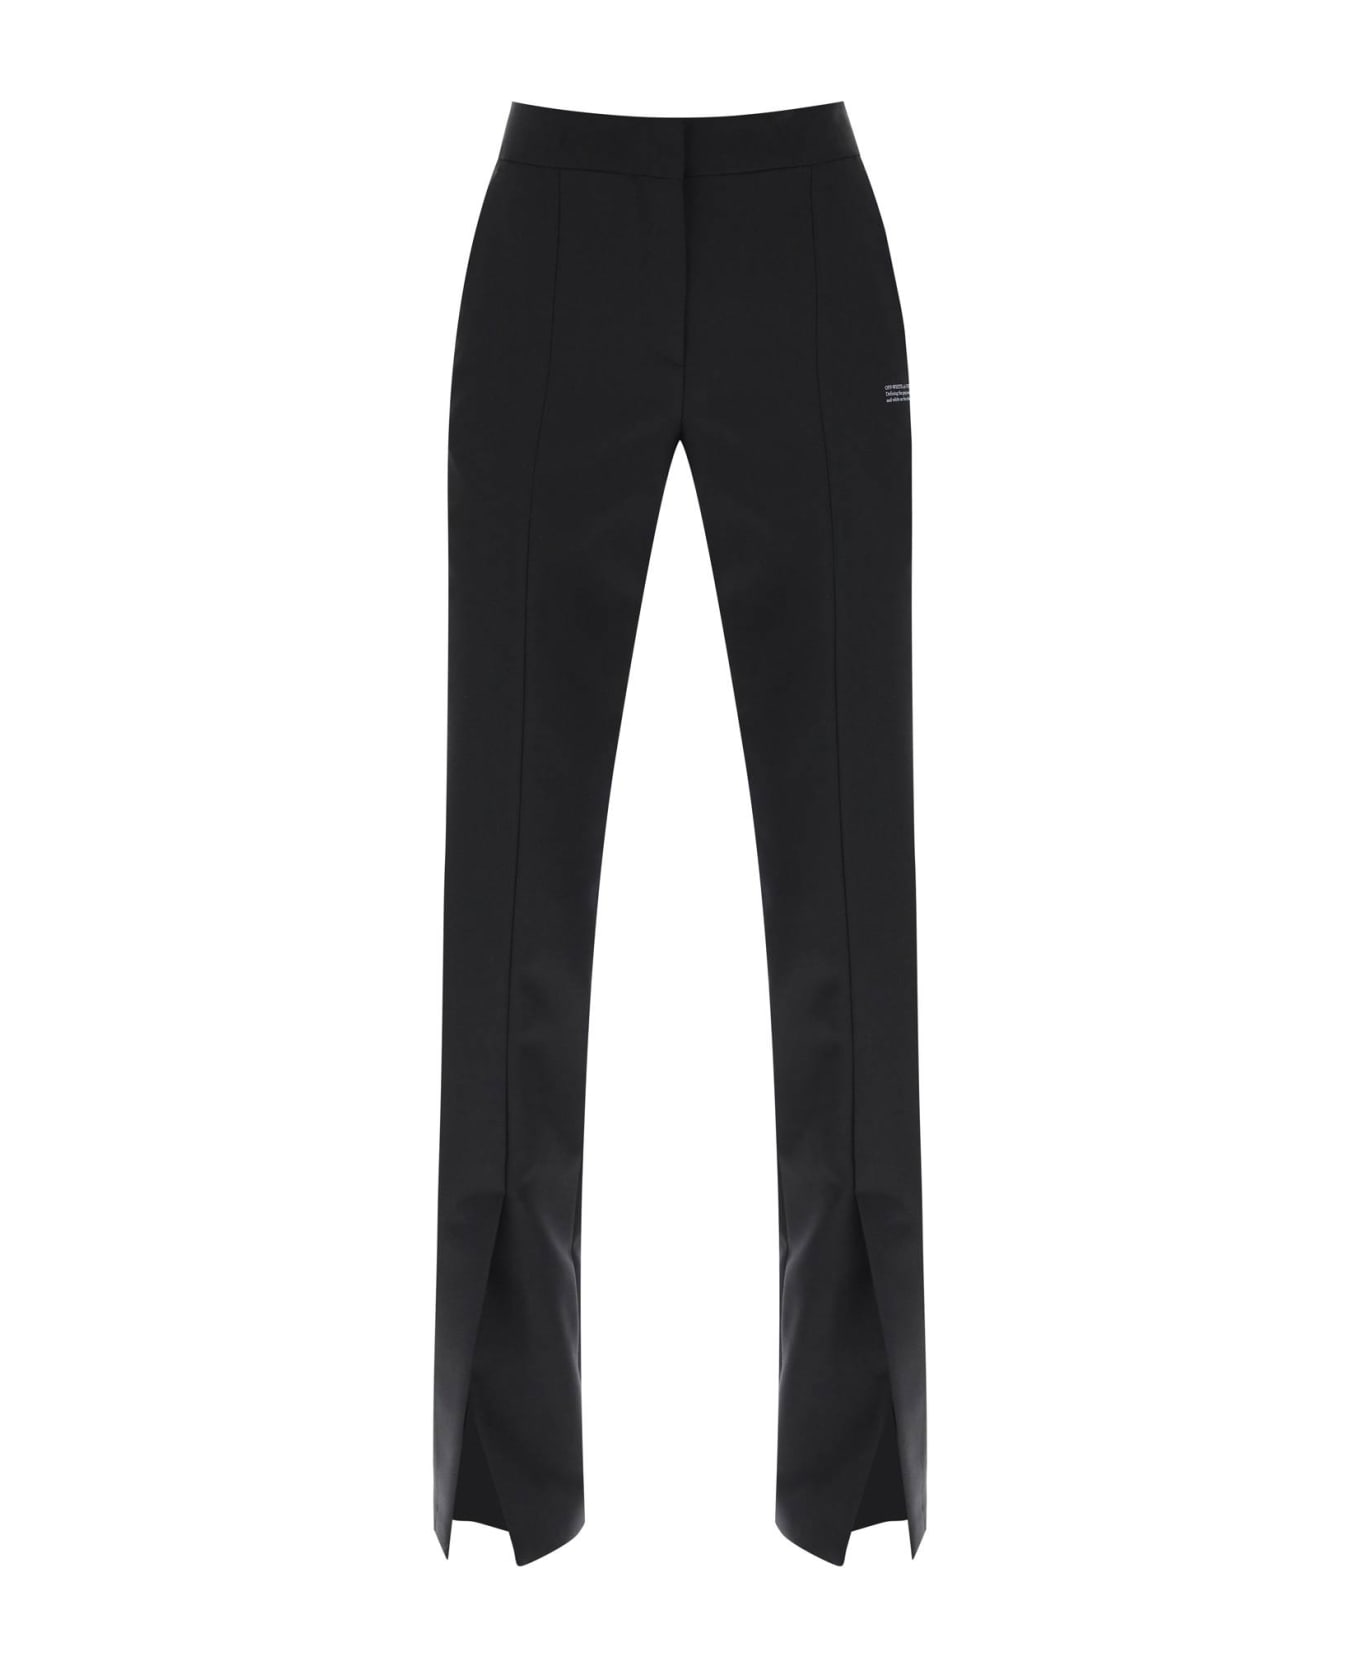 Off-White Corporate Tailoring Pants - Black